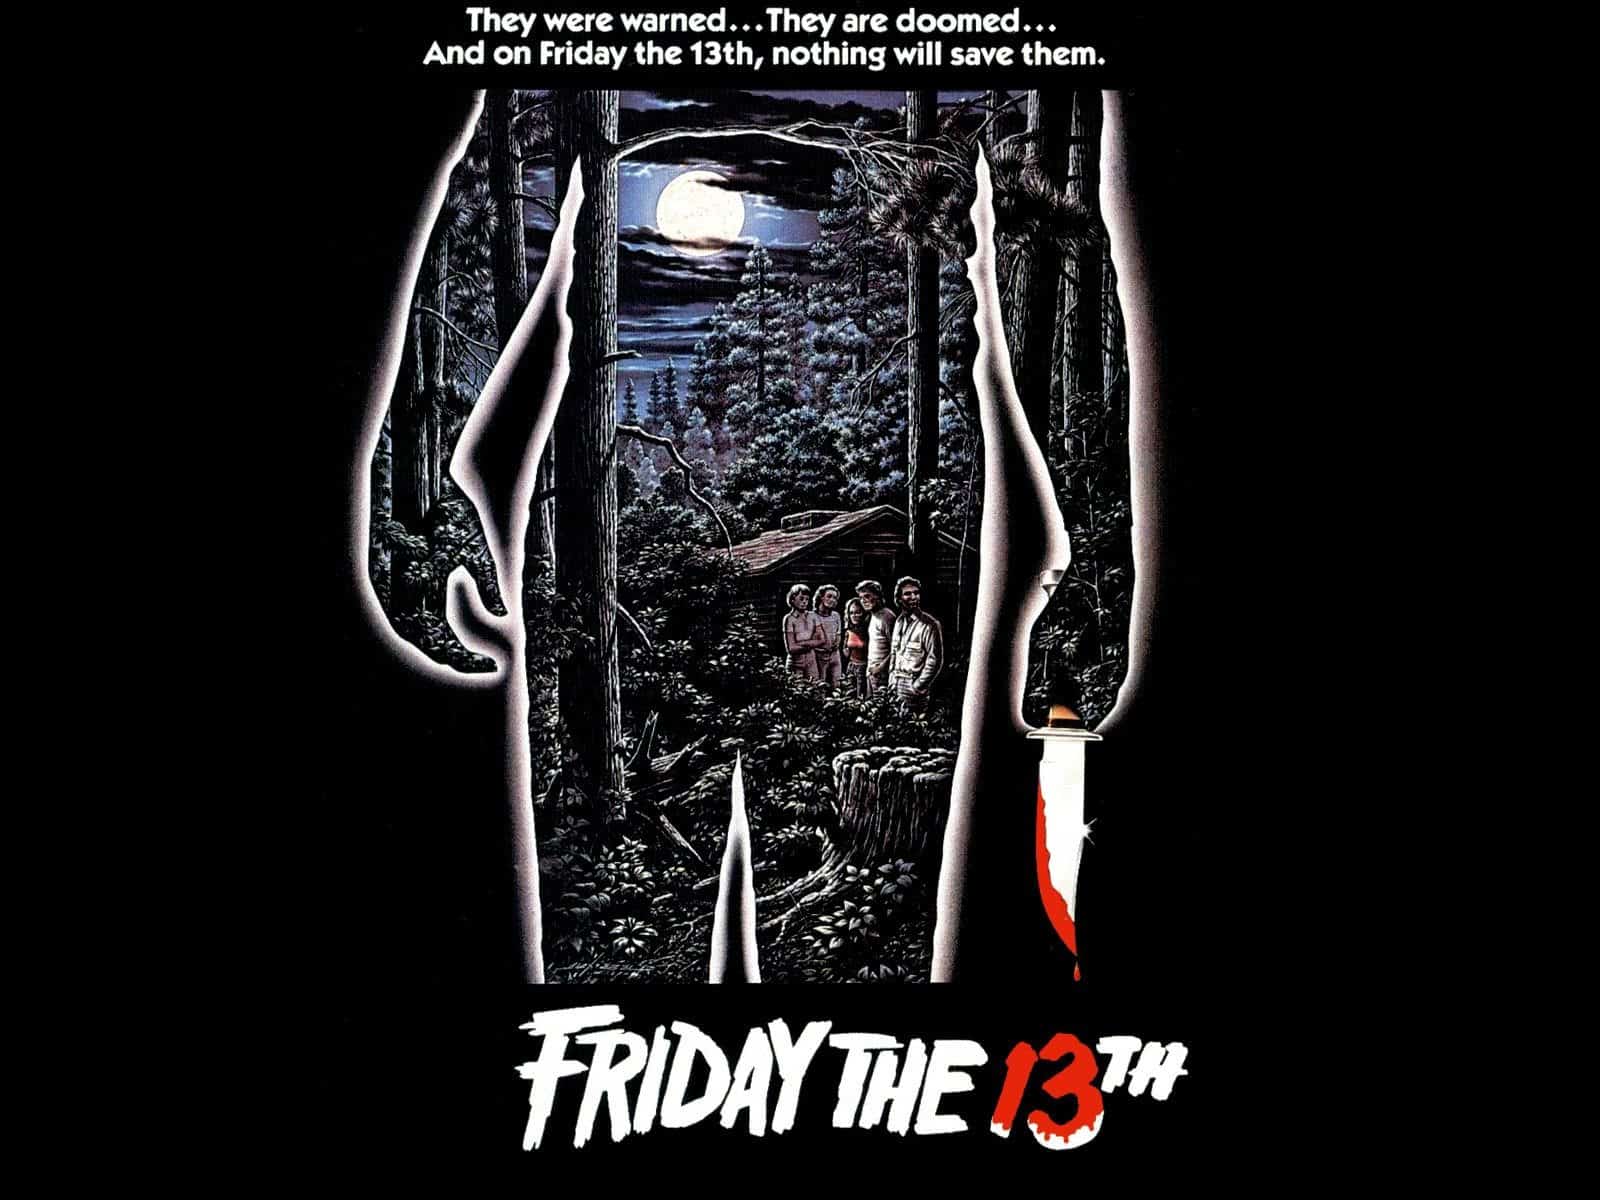 Horror Movie Review: Friday the 13th (1980)